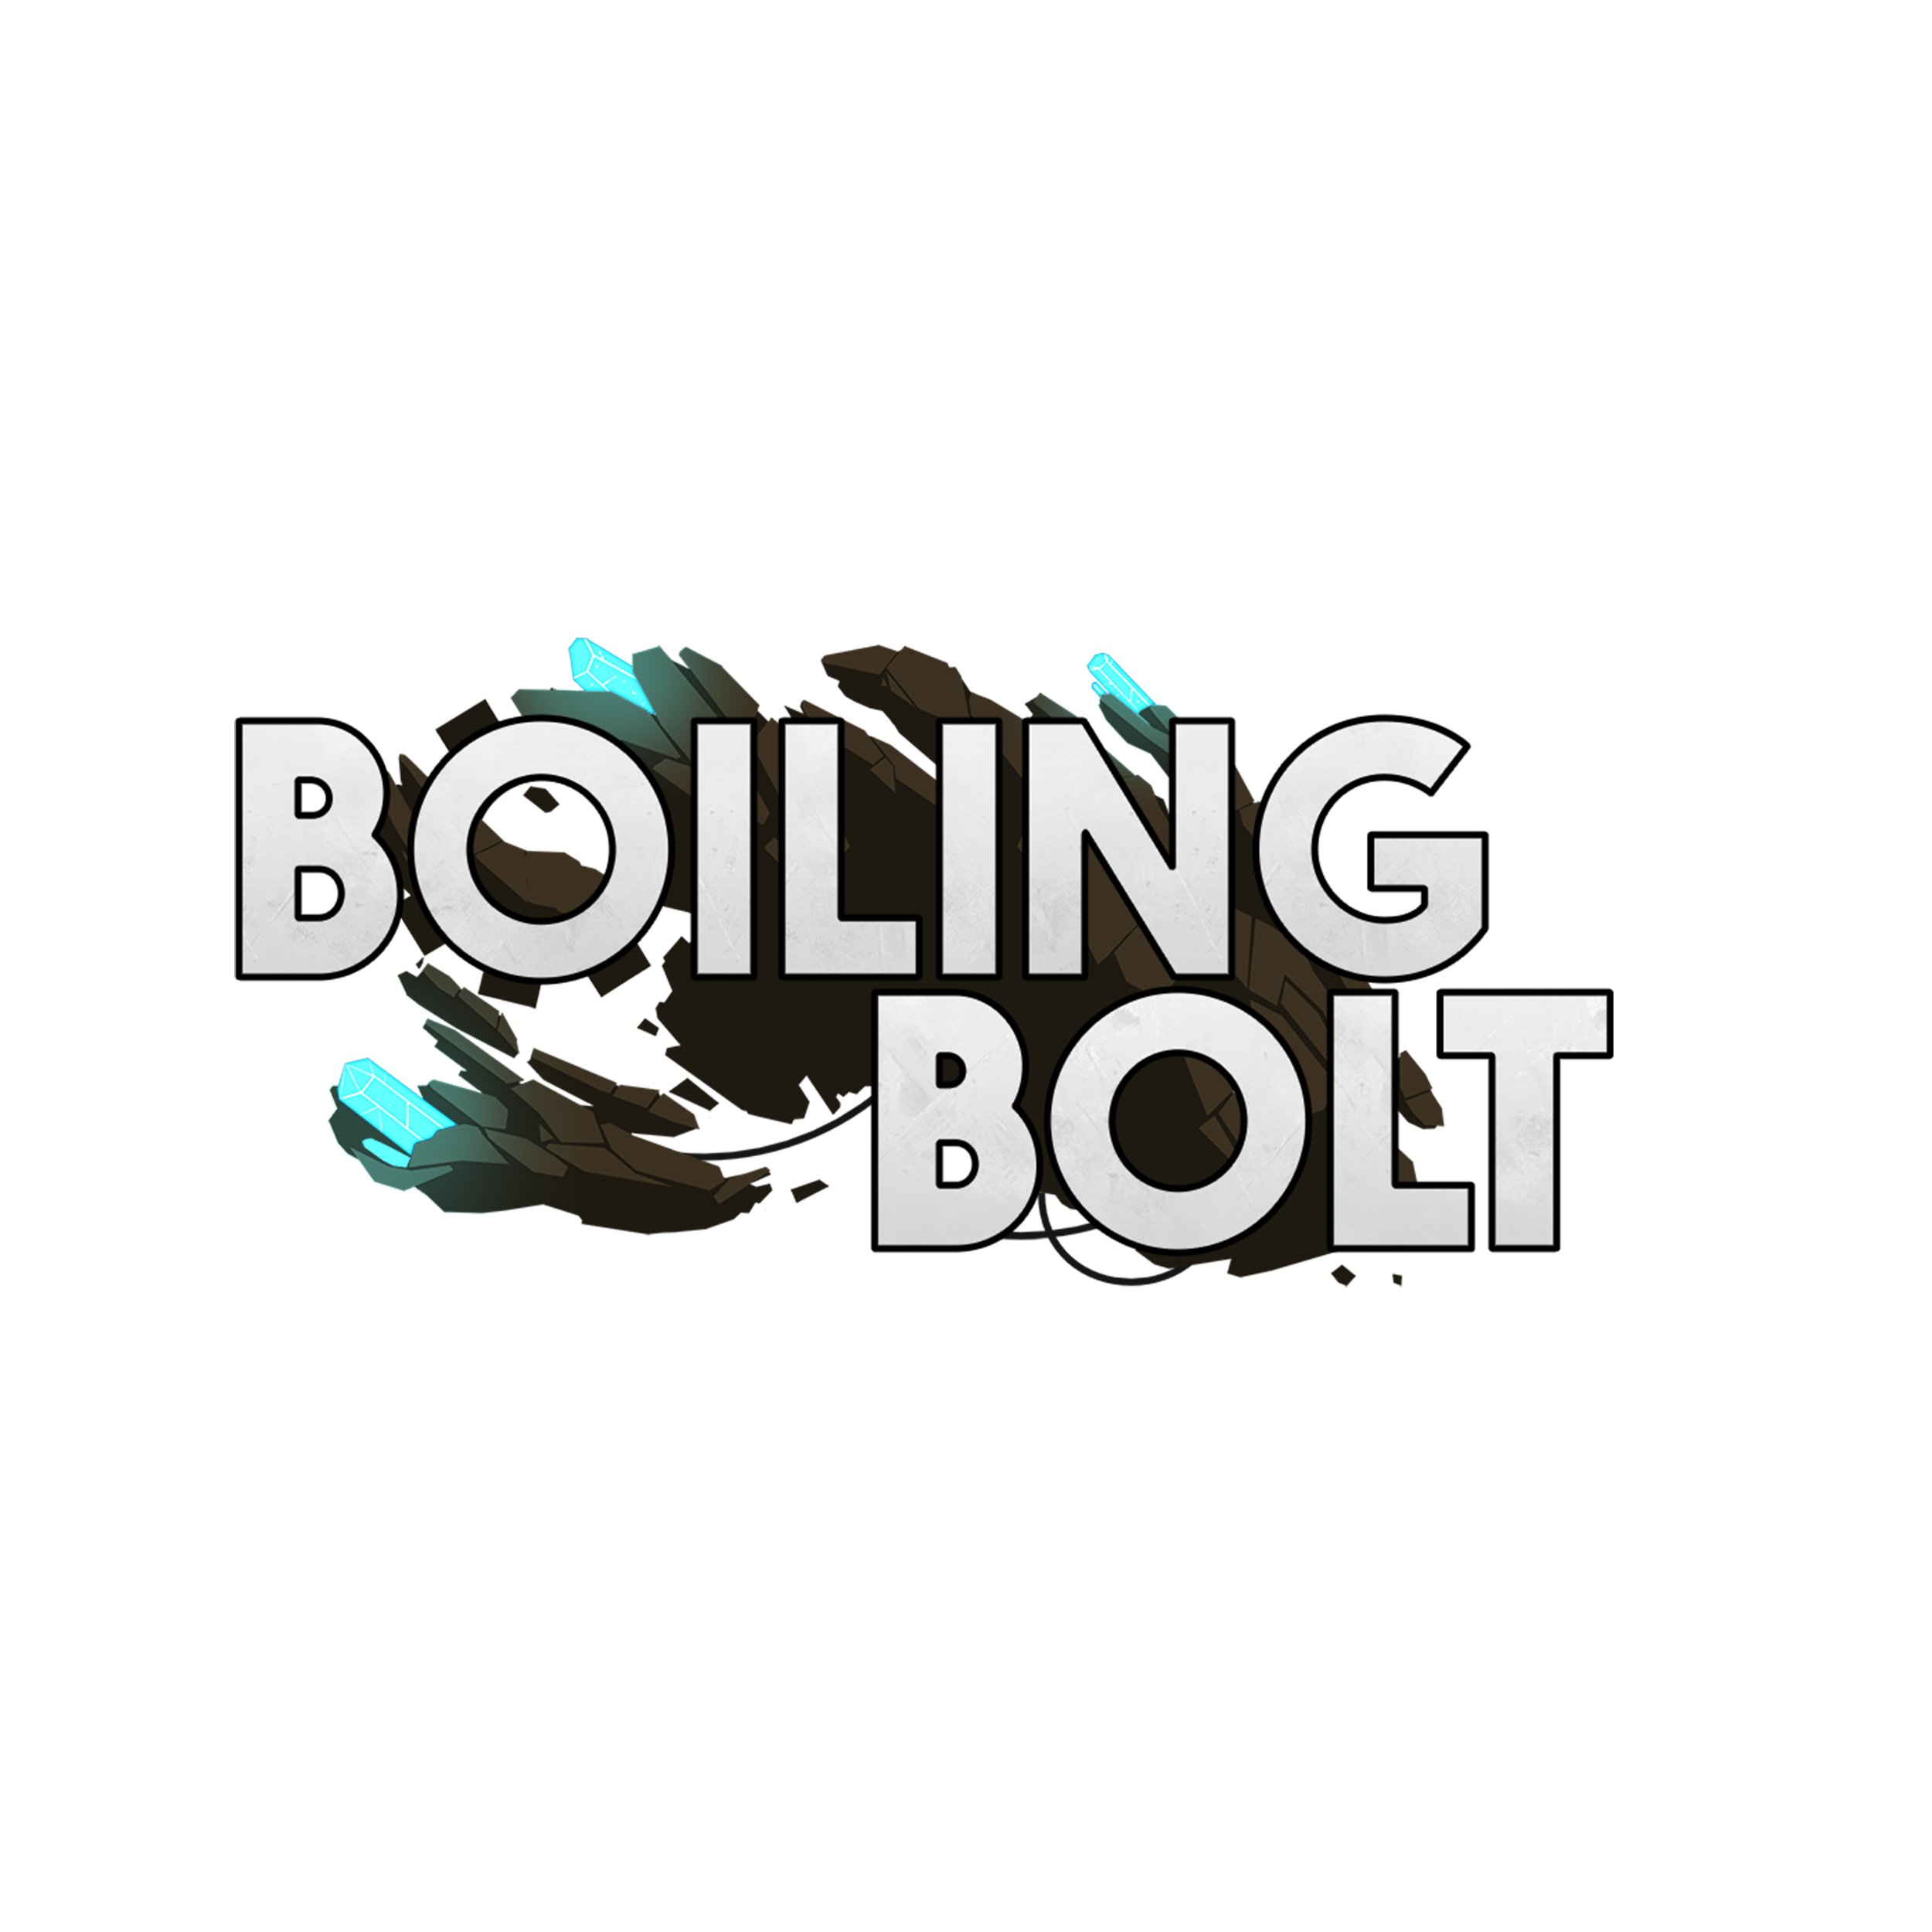 Boiling Bolt, PC Game